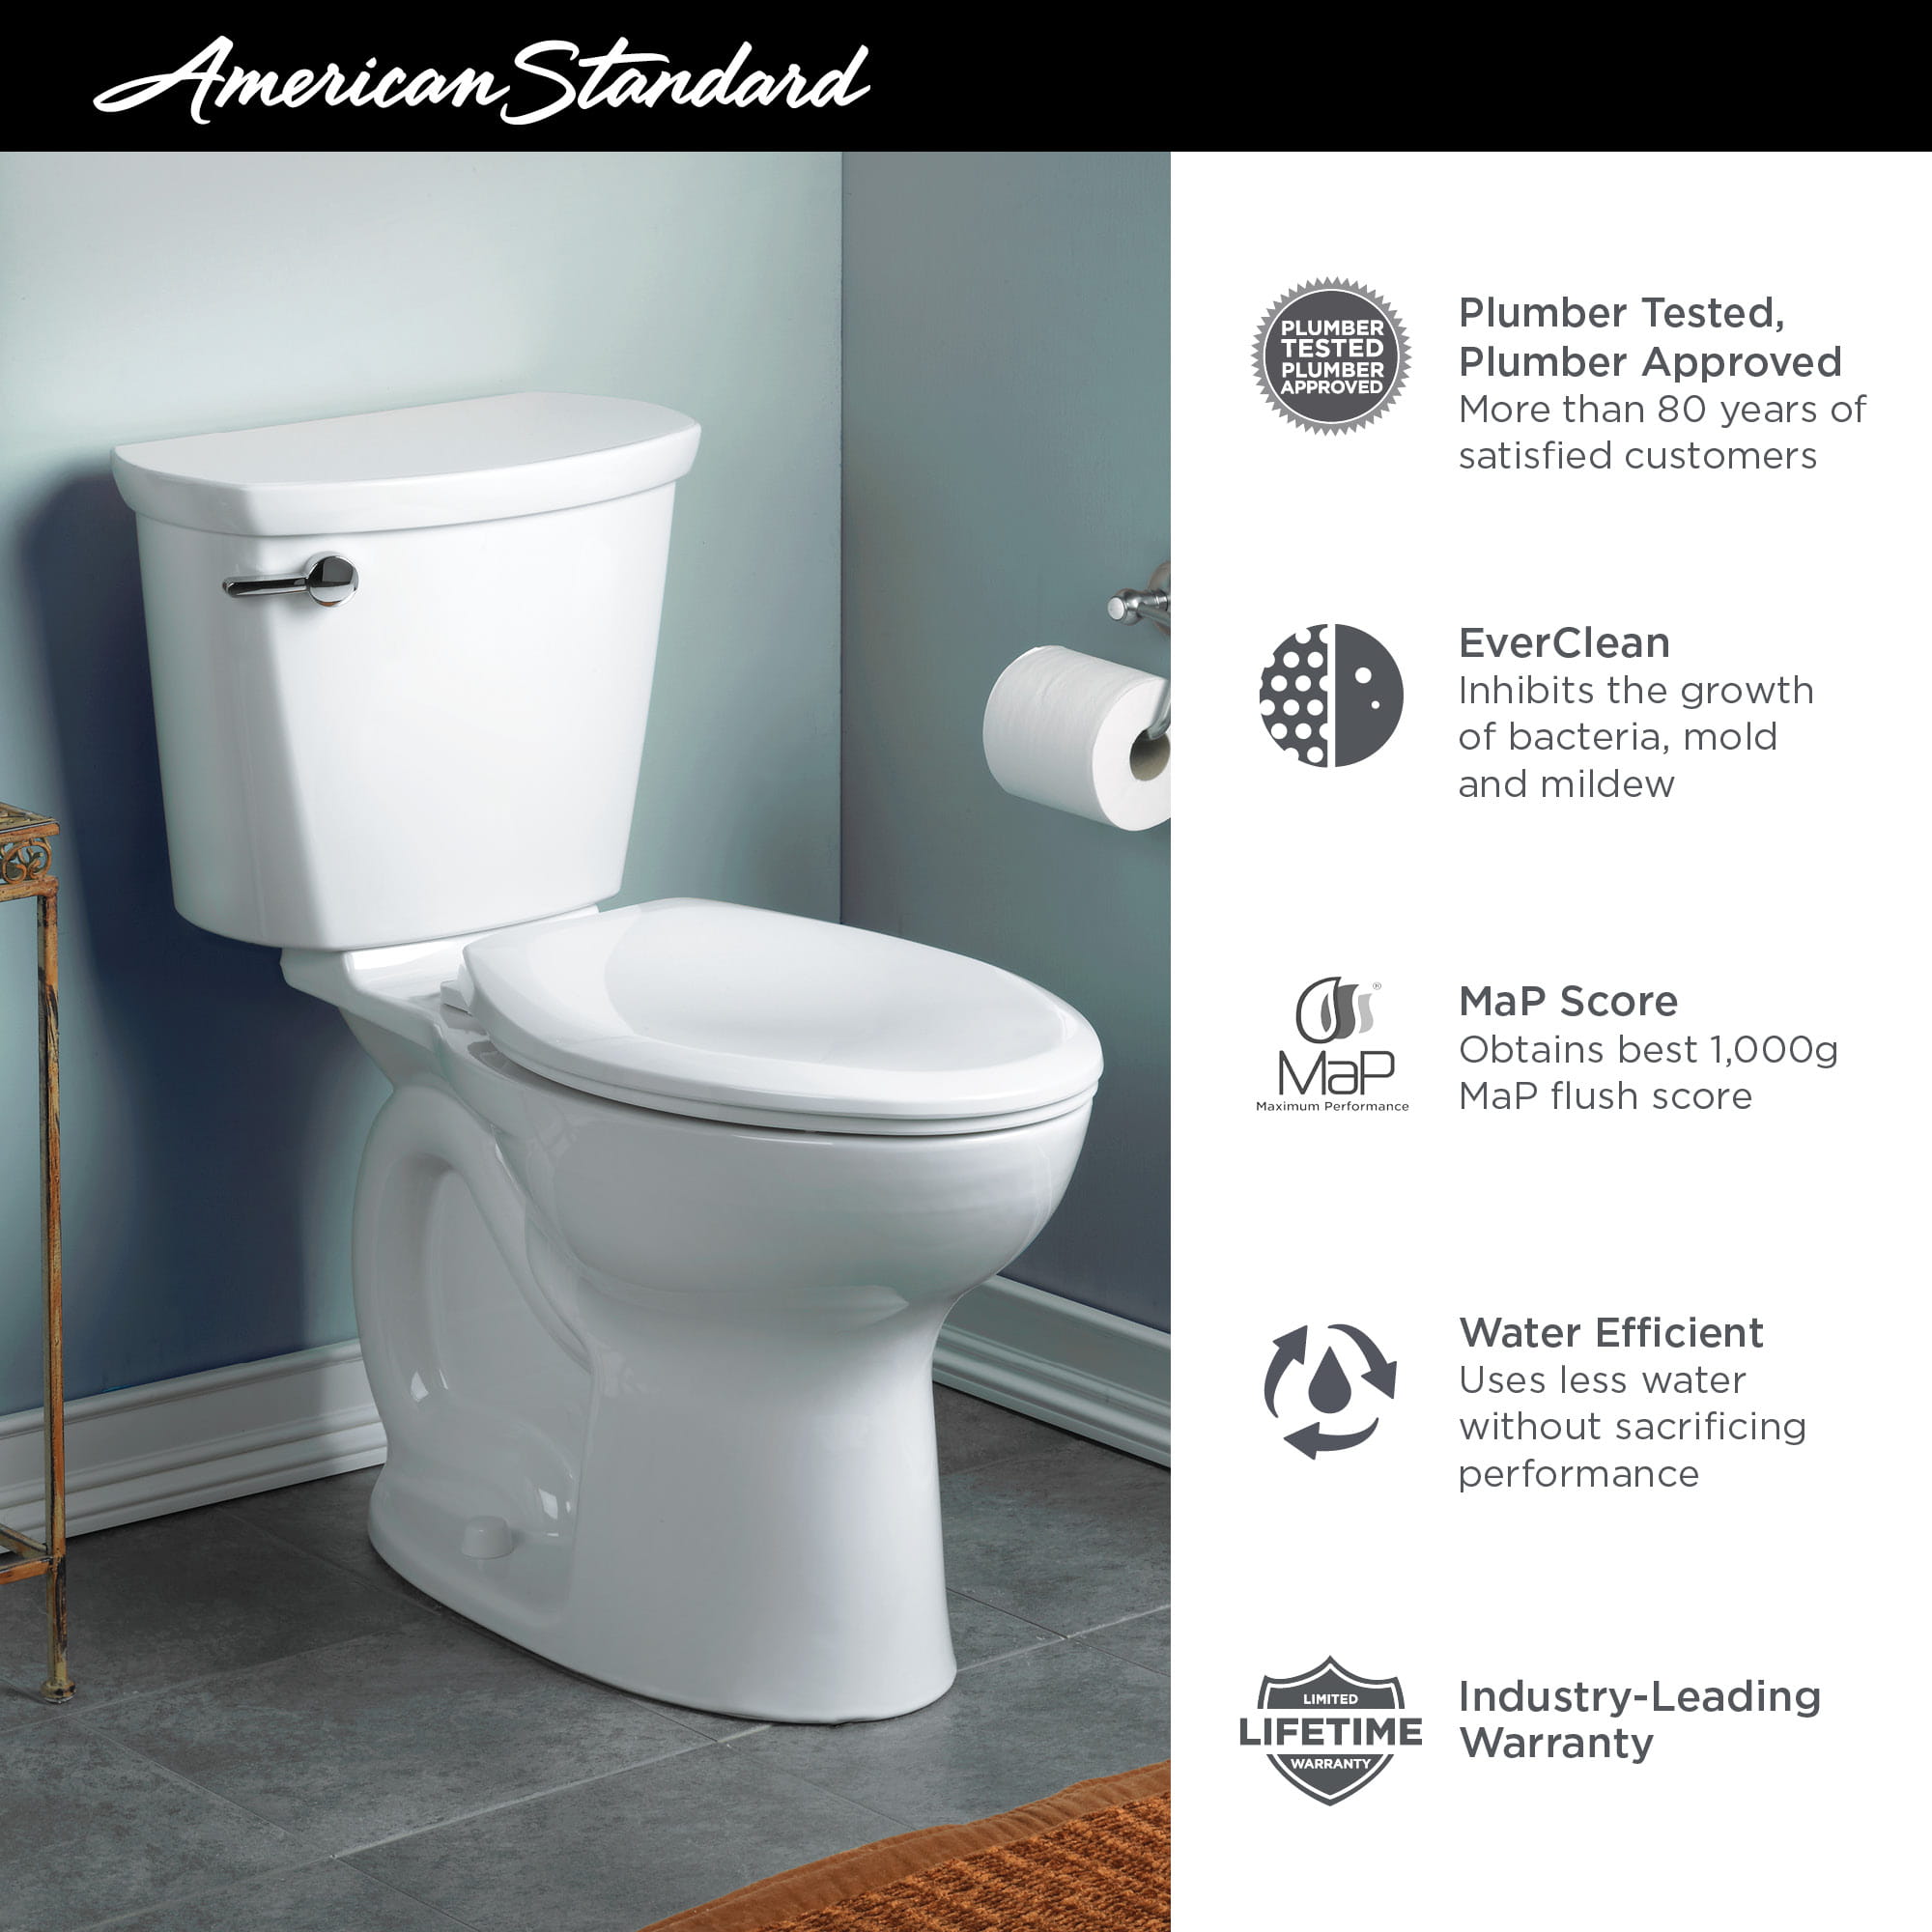 Cadet® PRO Two-Piece 1.6 gpf/6.0 Lpf Chair Height Elongated 10-Inch Rough Toilet Less Seat